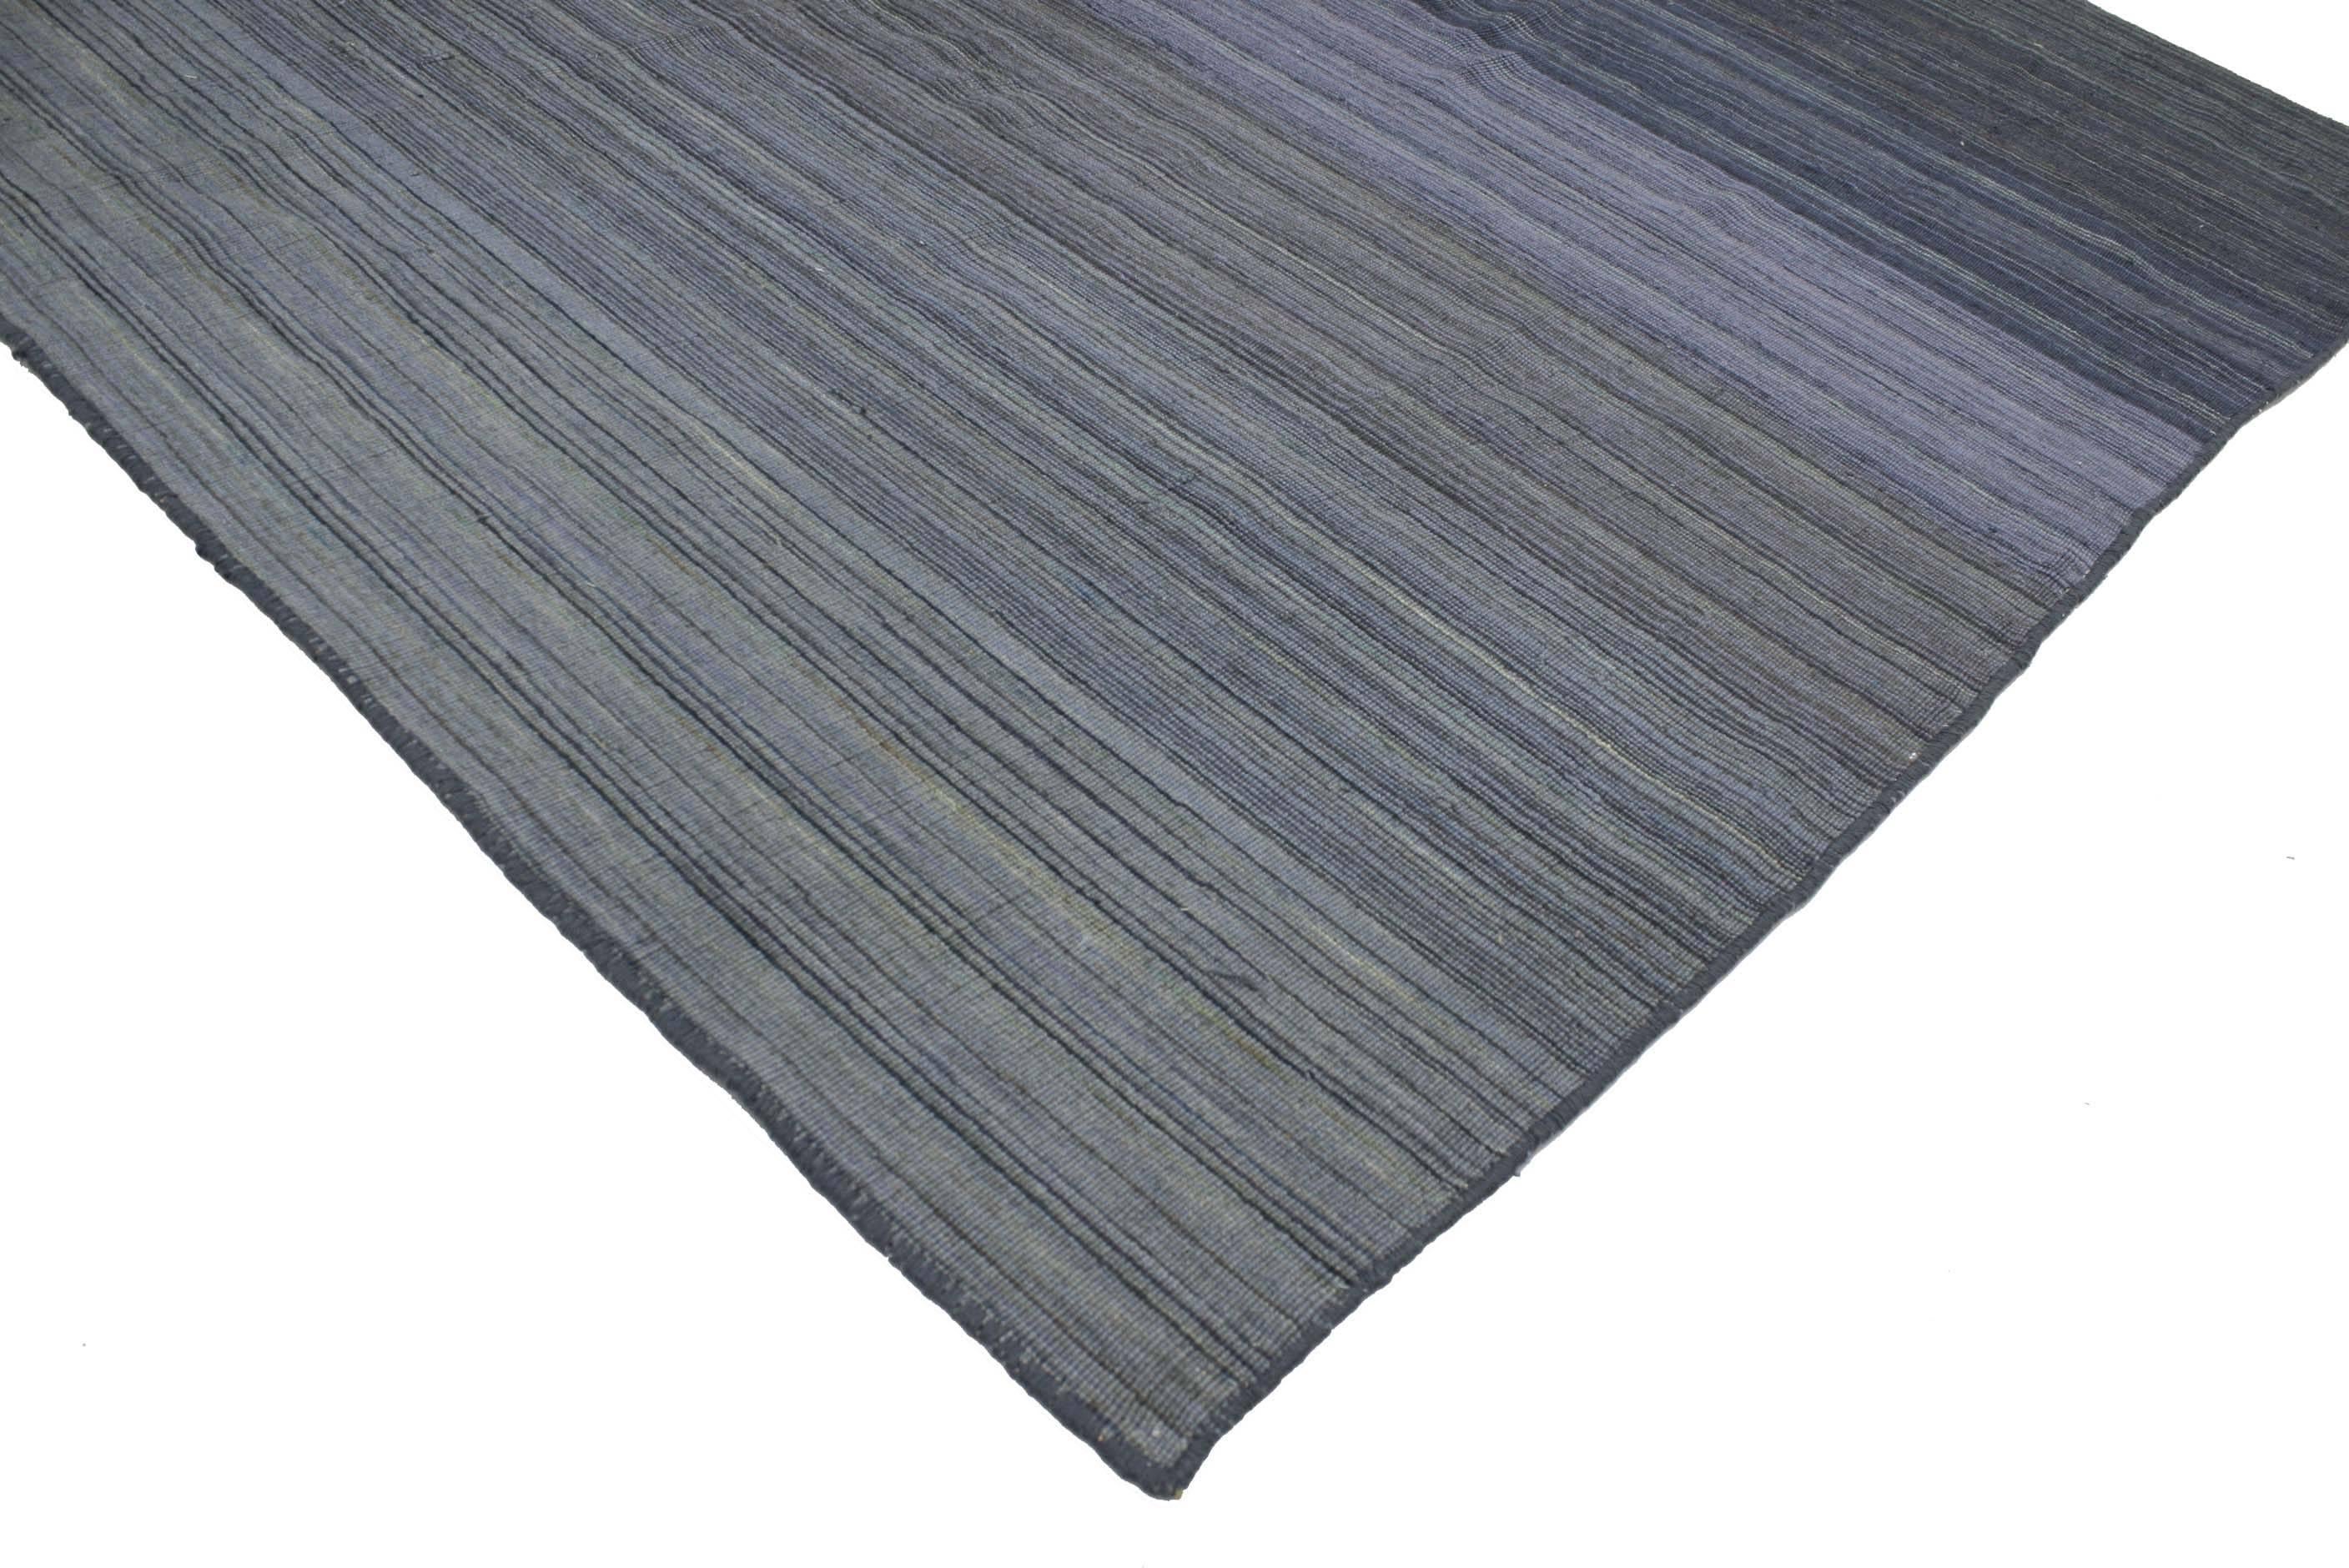 76909 Contemporary Modern Flat-Weave Rug, Ombre Kilim with Pastel Postmodern Style. Like a rippling infinity pool or an endless horizon, this contemporary modern flat-weave rug features an ombre design. Square rugs like this modern contemporary